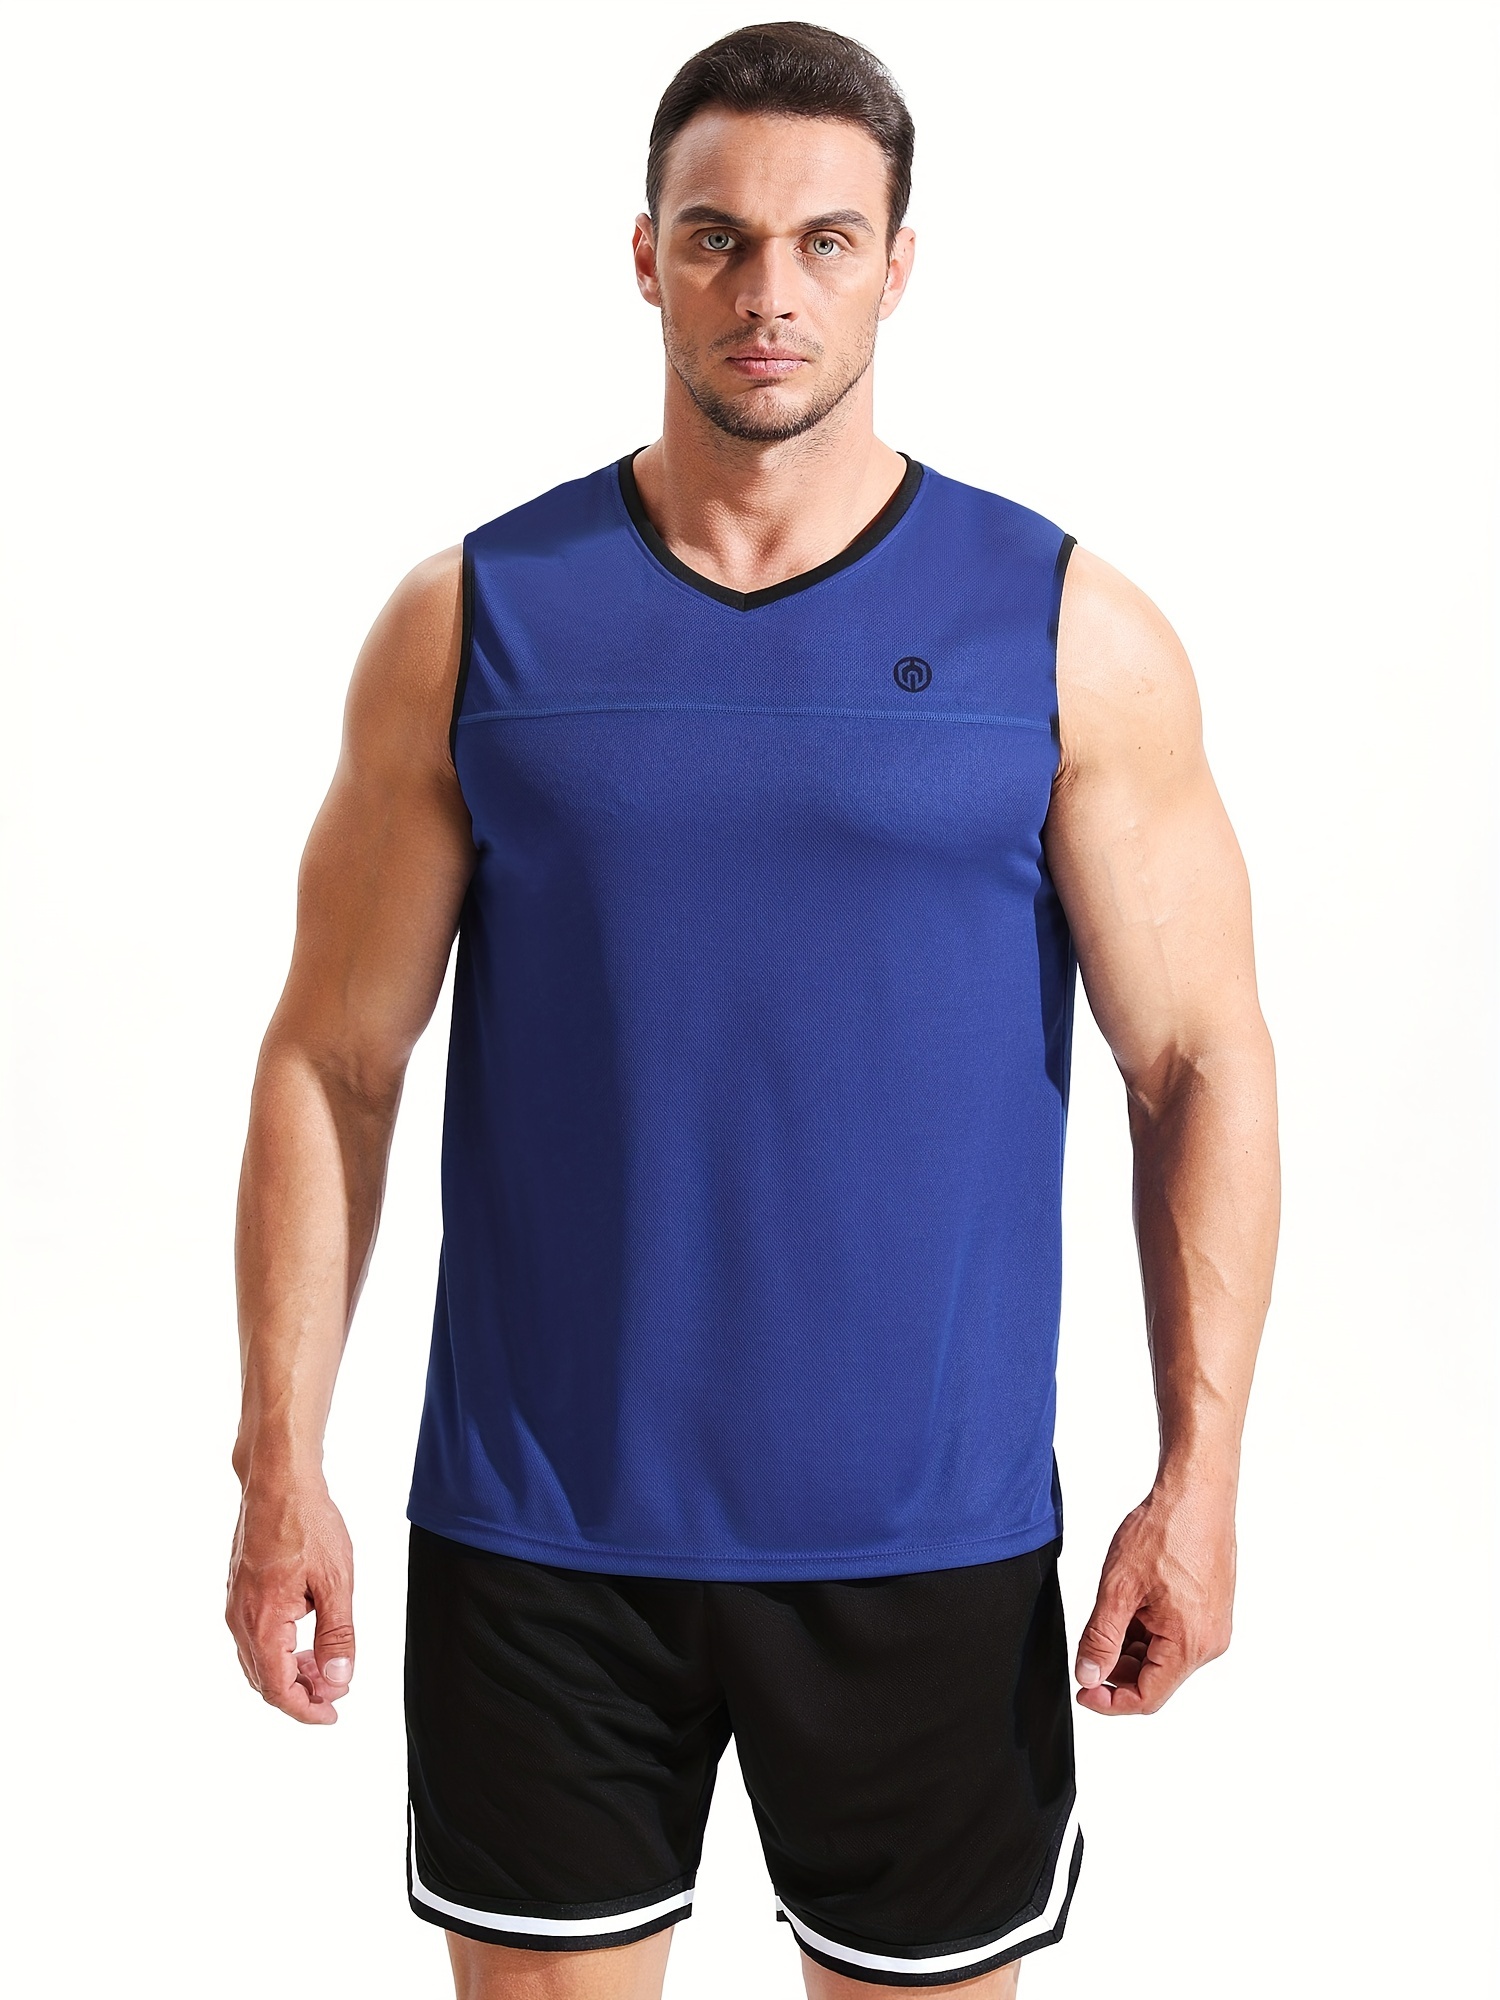 M&S 'GoodMove' Vest Top Breathable Quick Dry Fitness Running 18